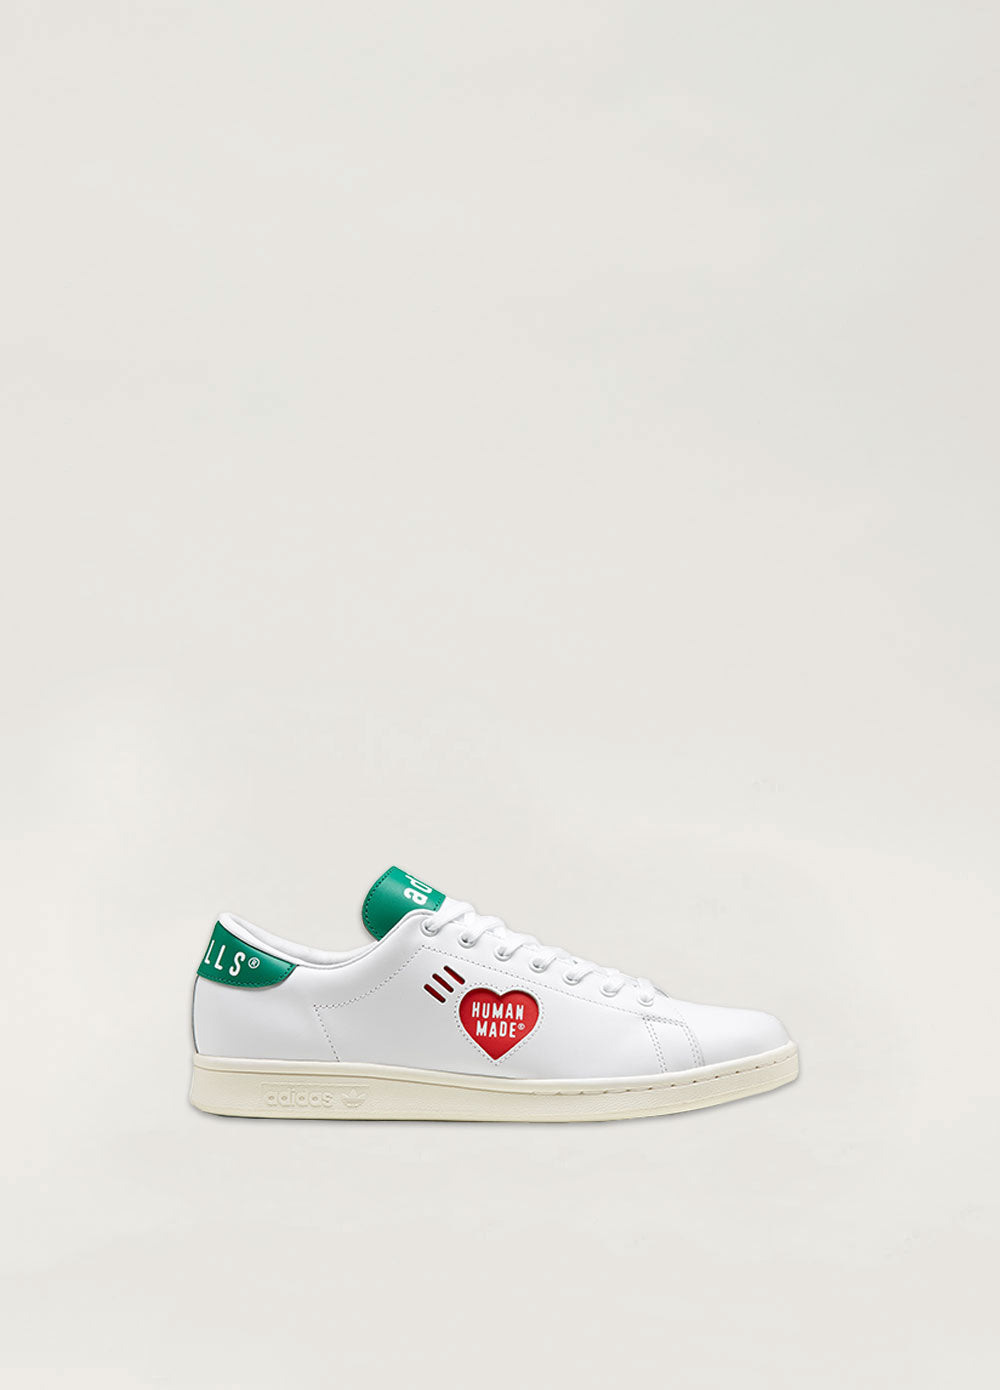 x Human Made Stan Smith Sneakers